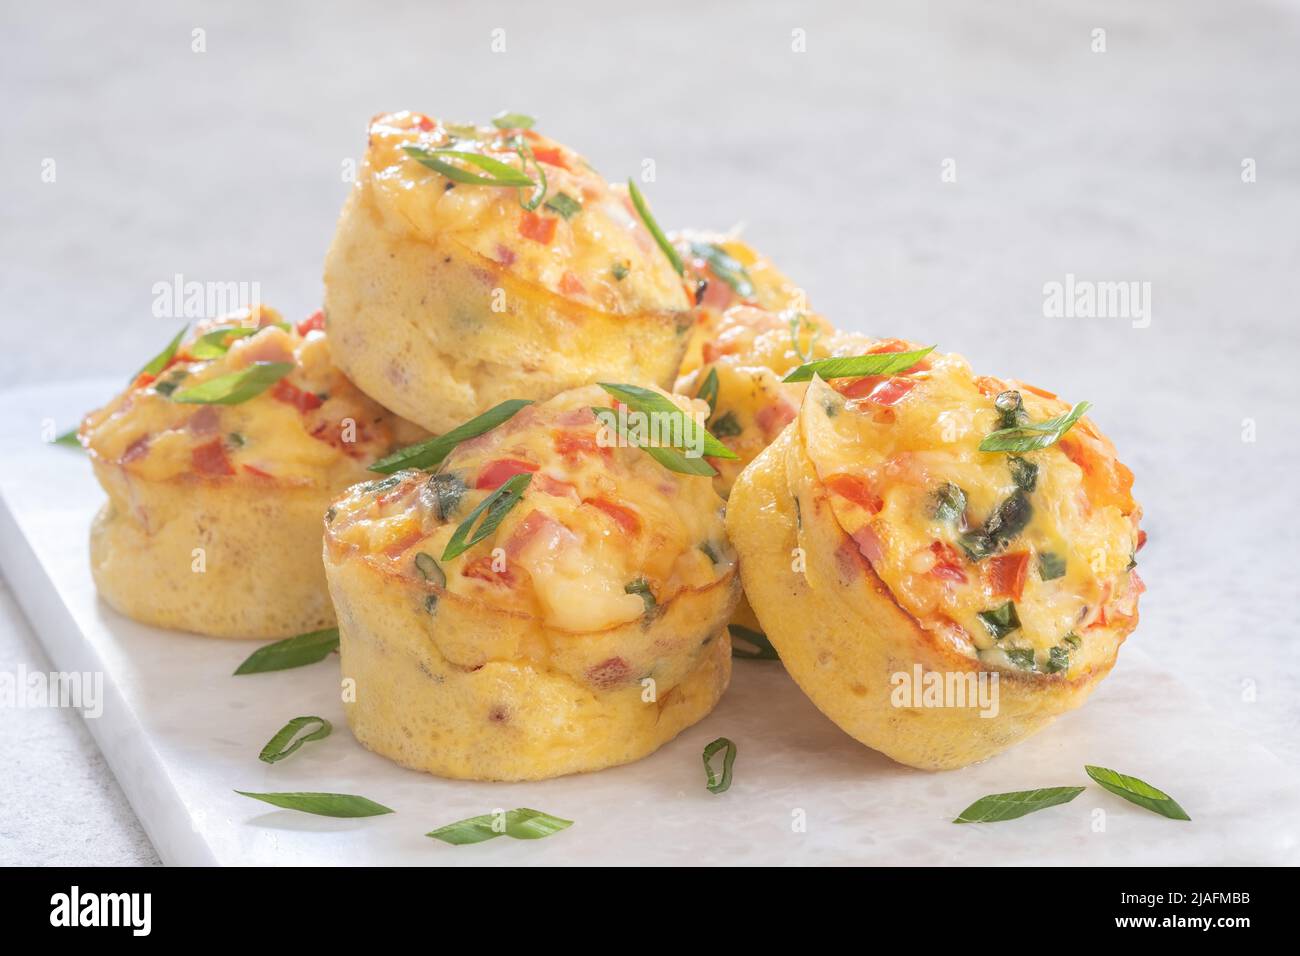 Delicious egg muffins with ham, cheese and vegetables Stock Photo